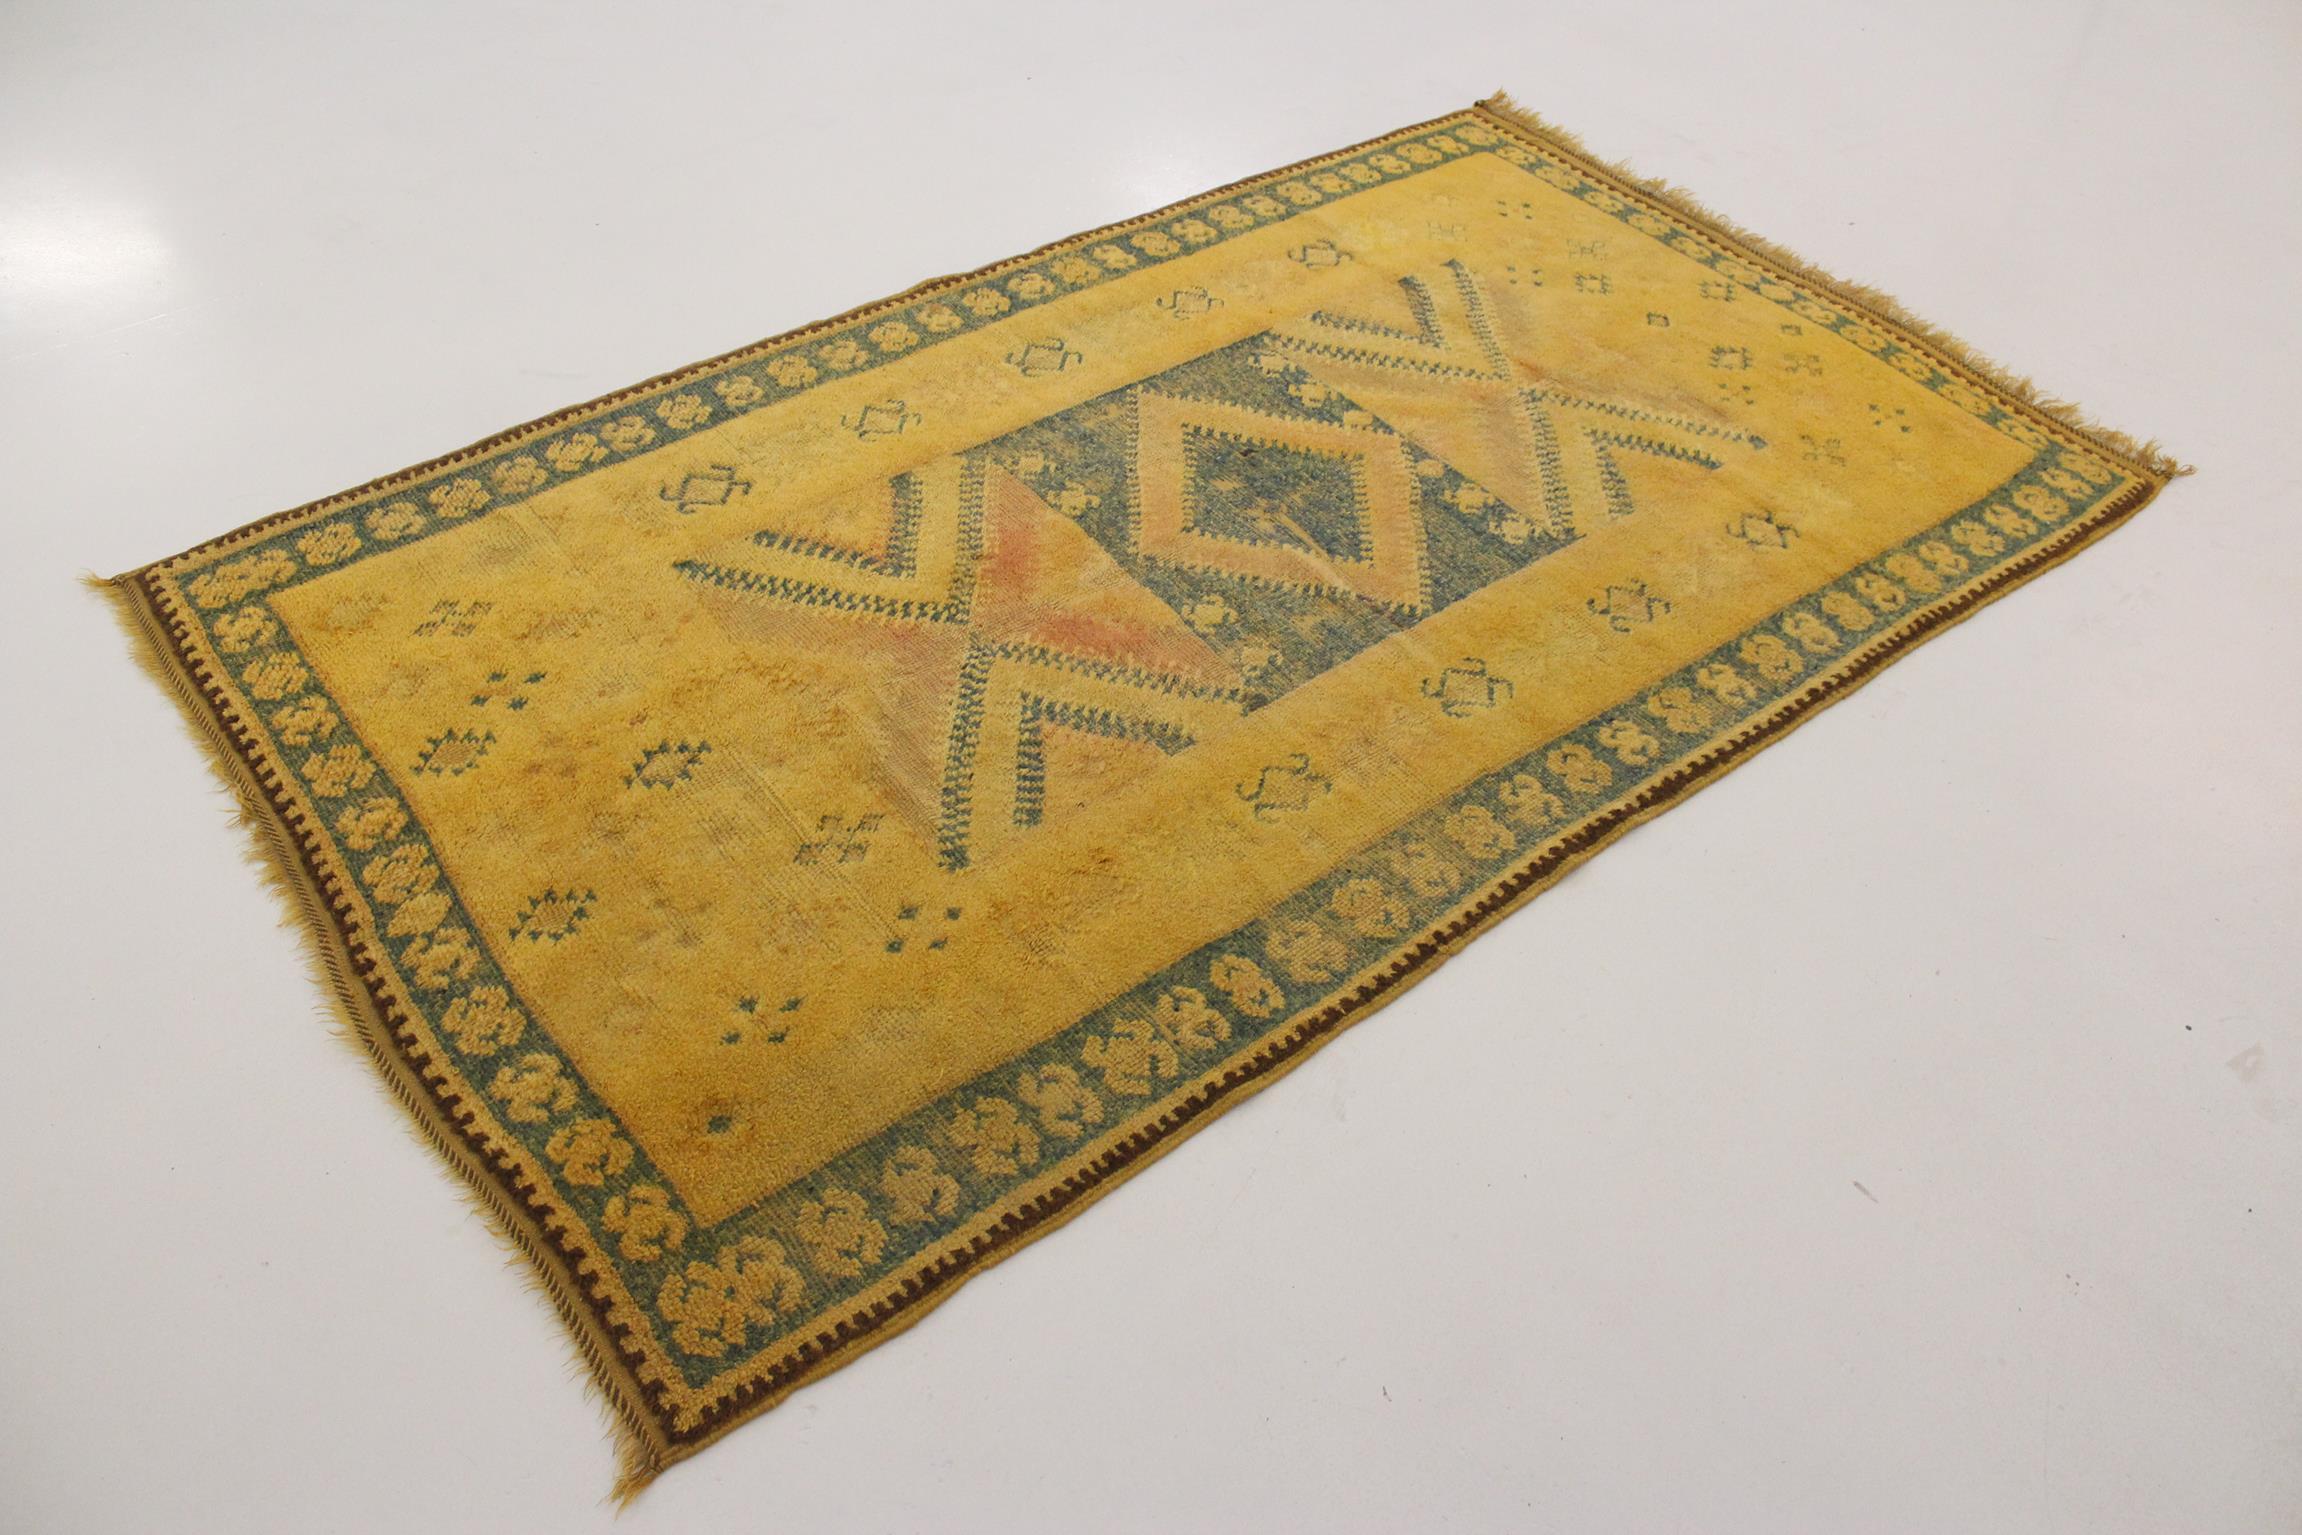 Hand-Woven Vintage Moroccan Taznakht rug - Yellow/blue - 4.3x7.6feet / 134x234cm For Sale